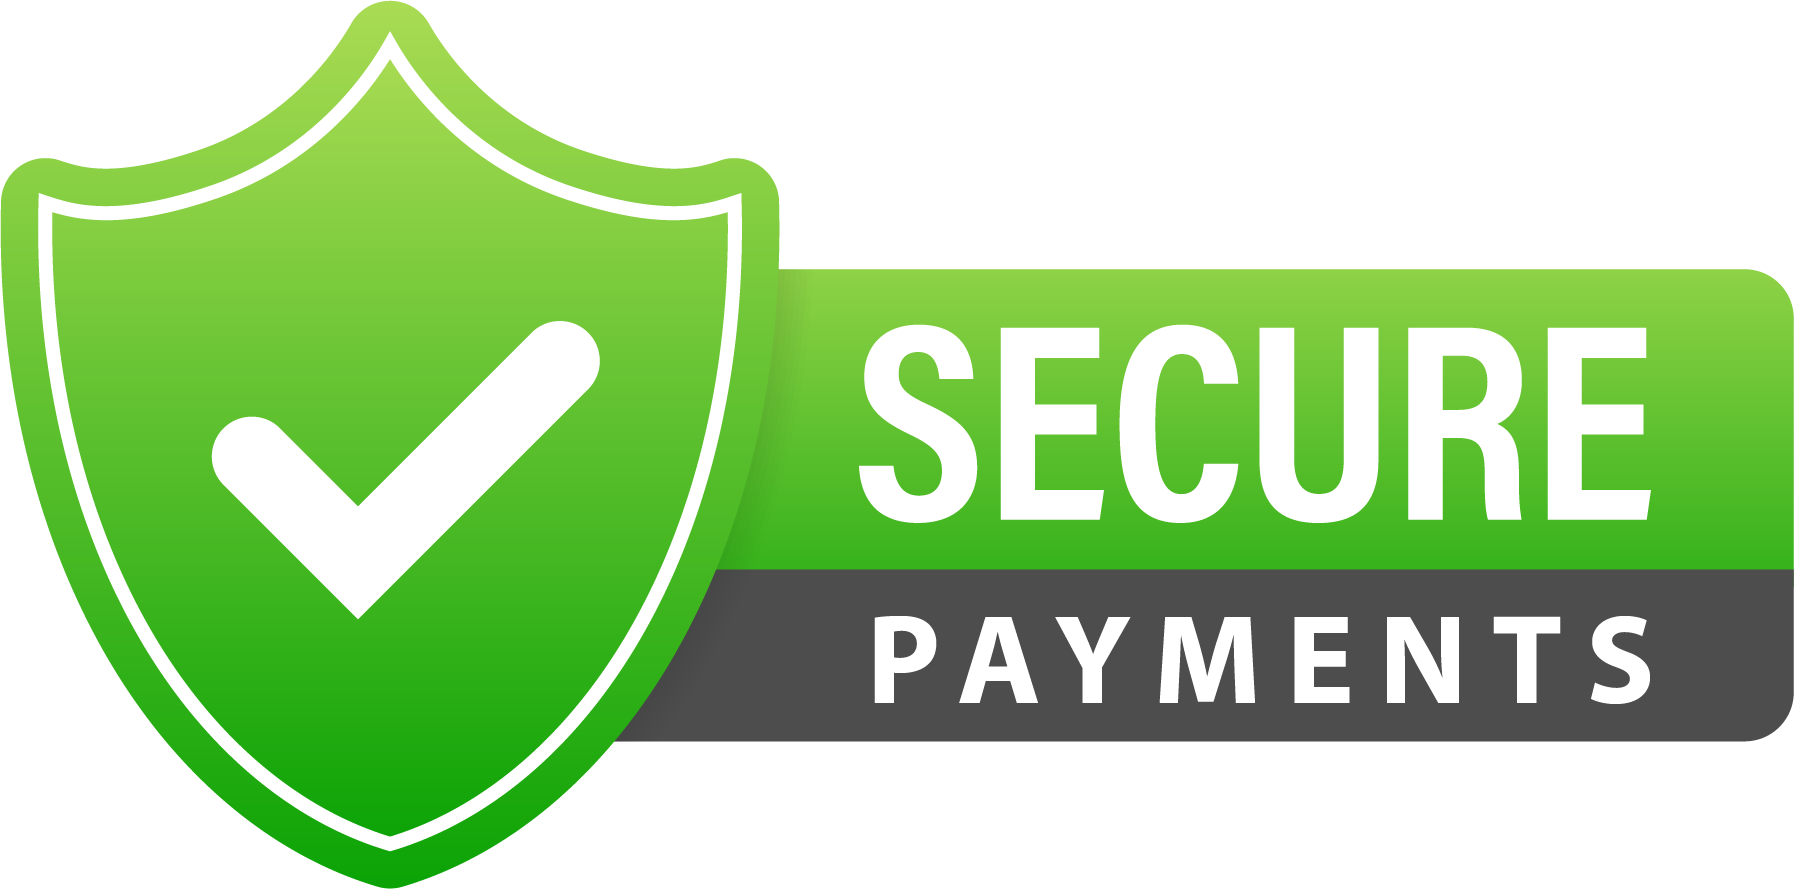 SECURE PAYMENTS